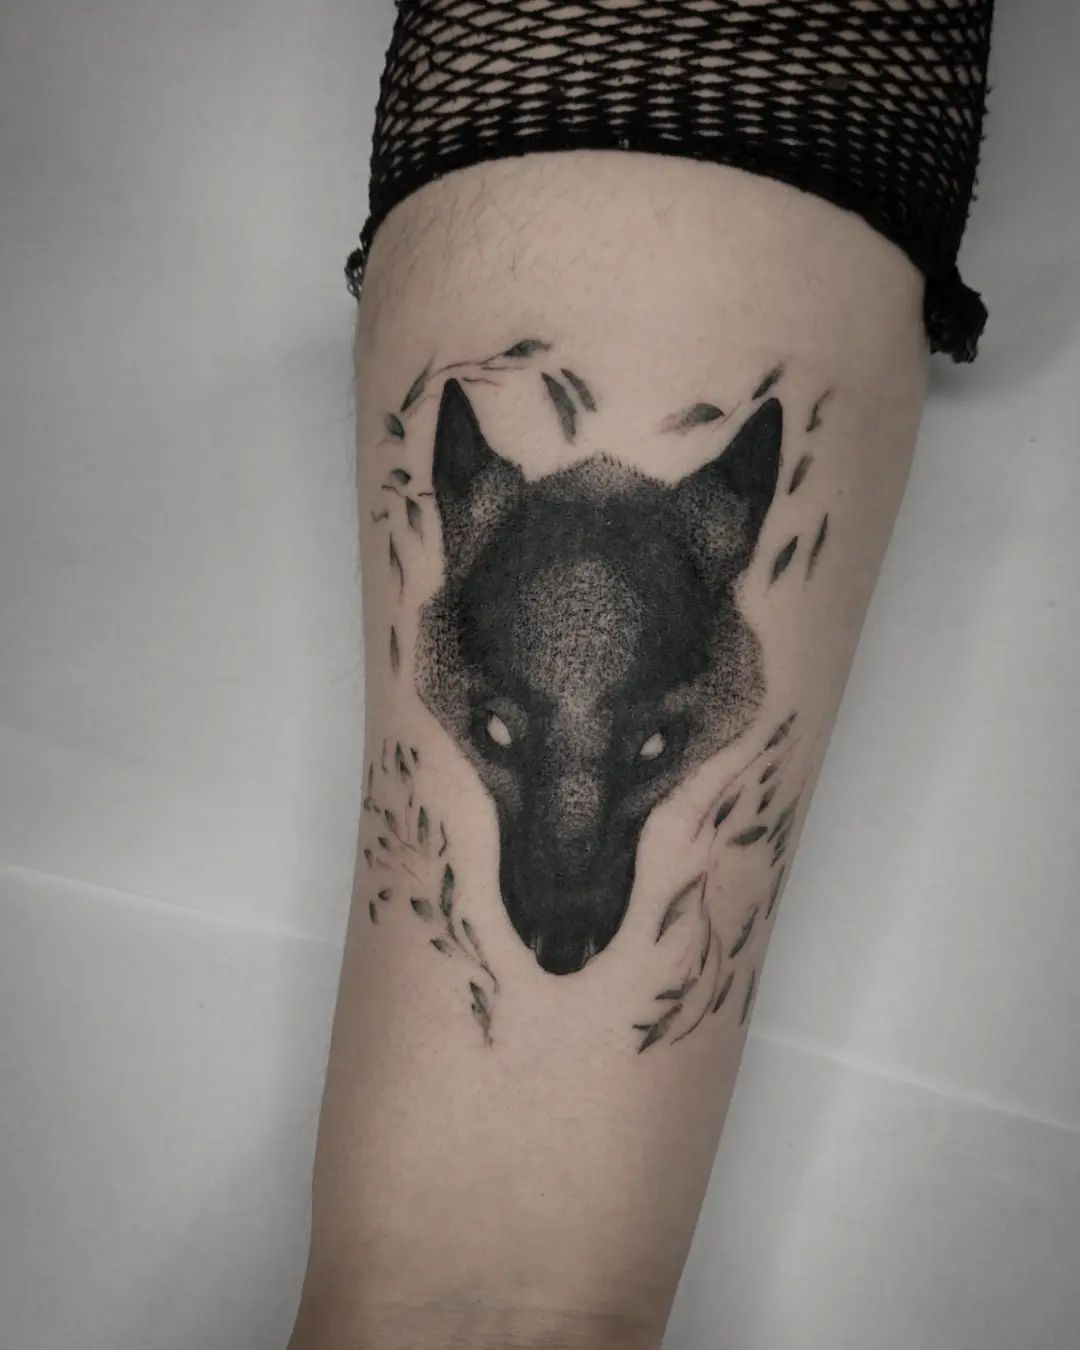 This black wolf tattoo will take you around two hours to achieve.